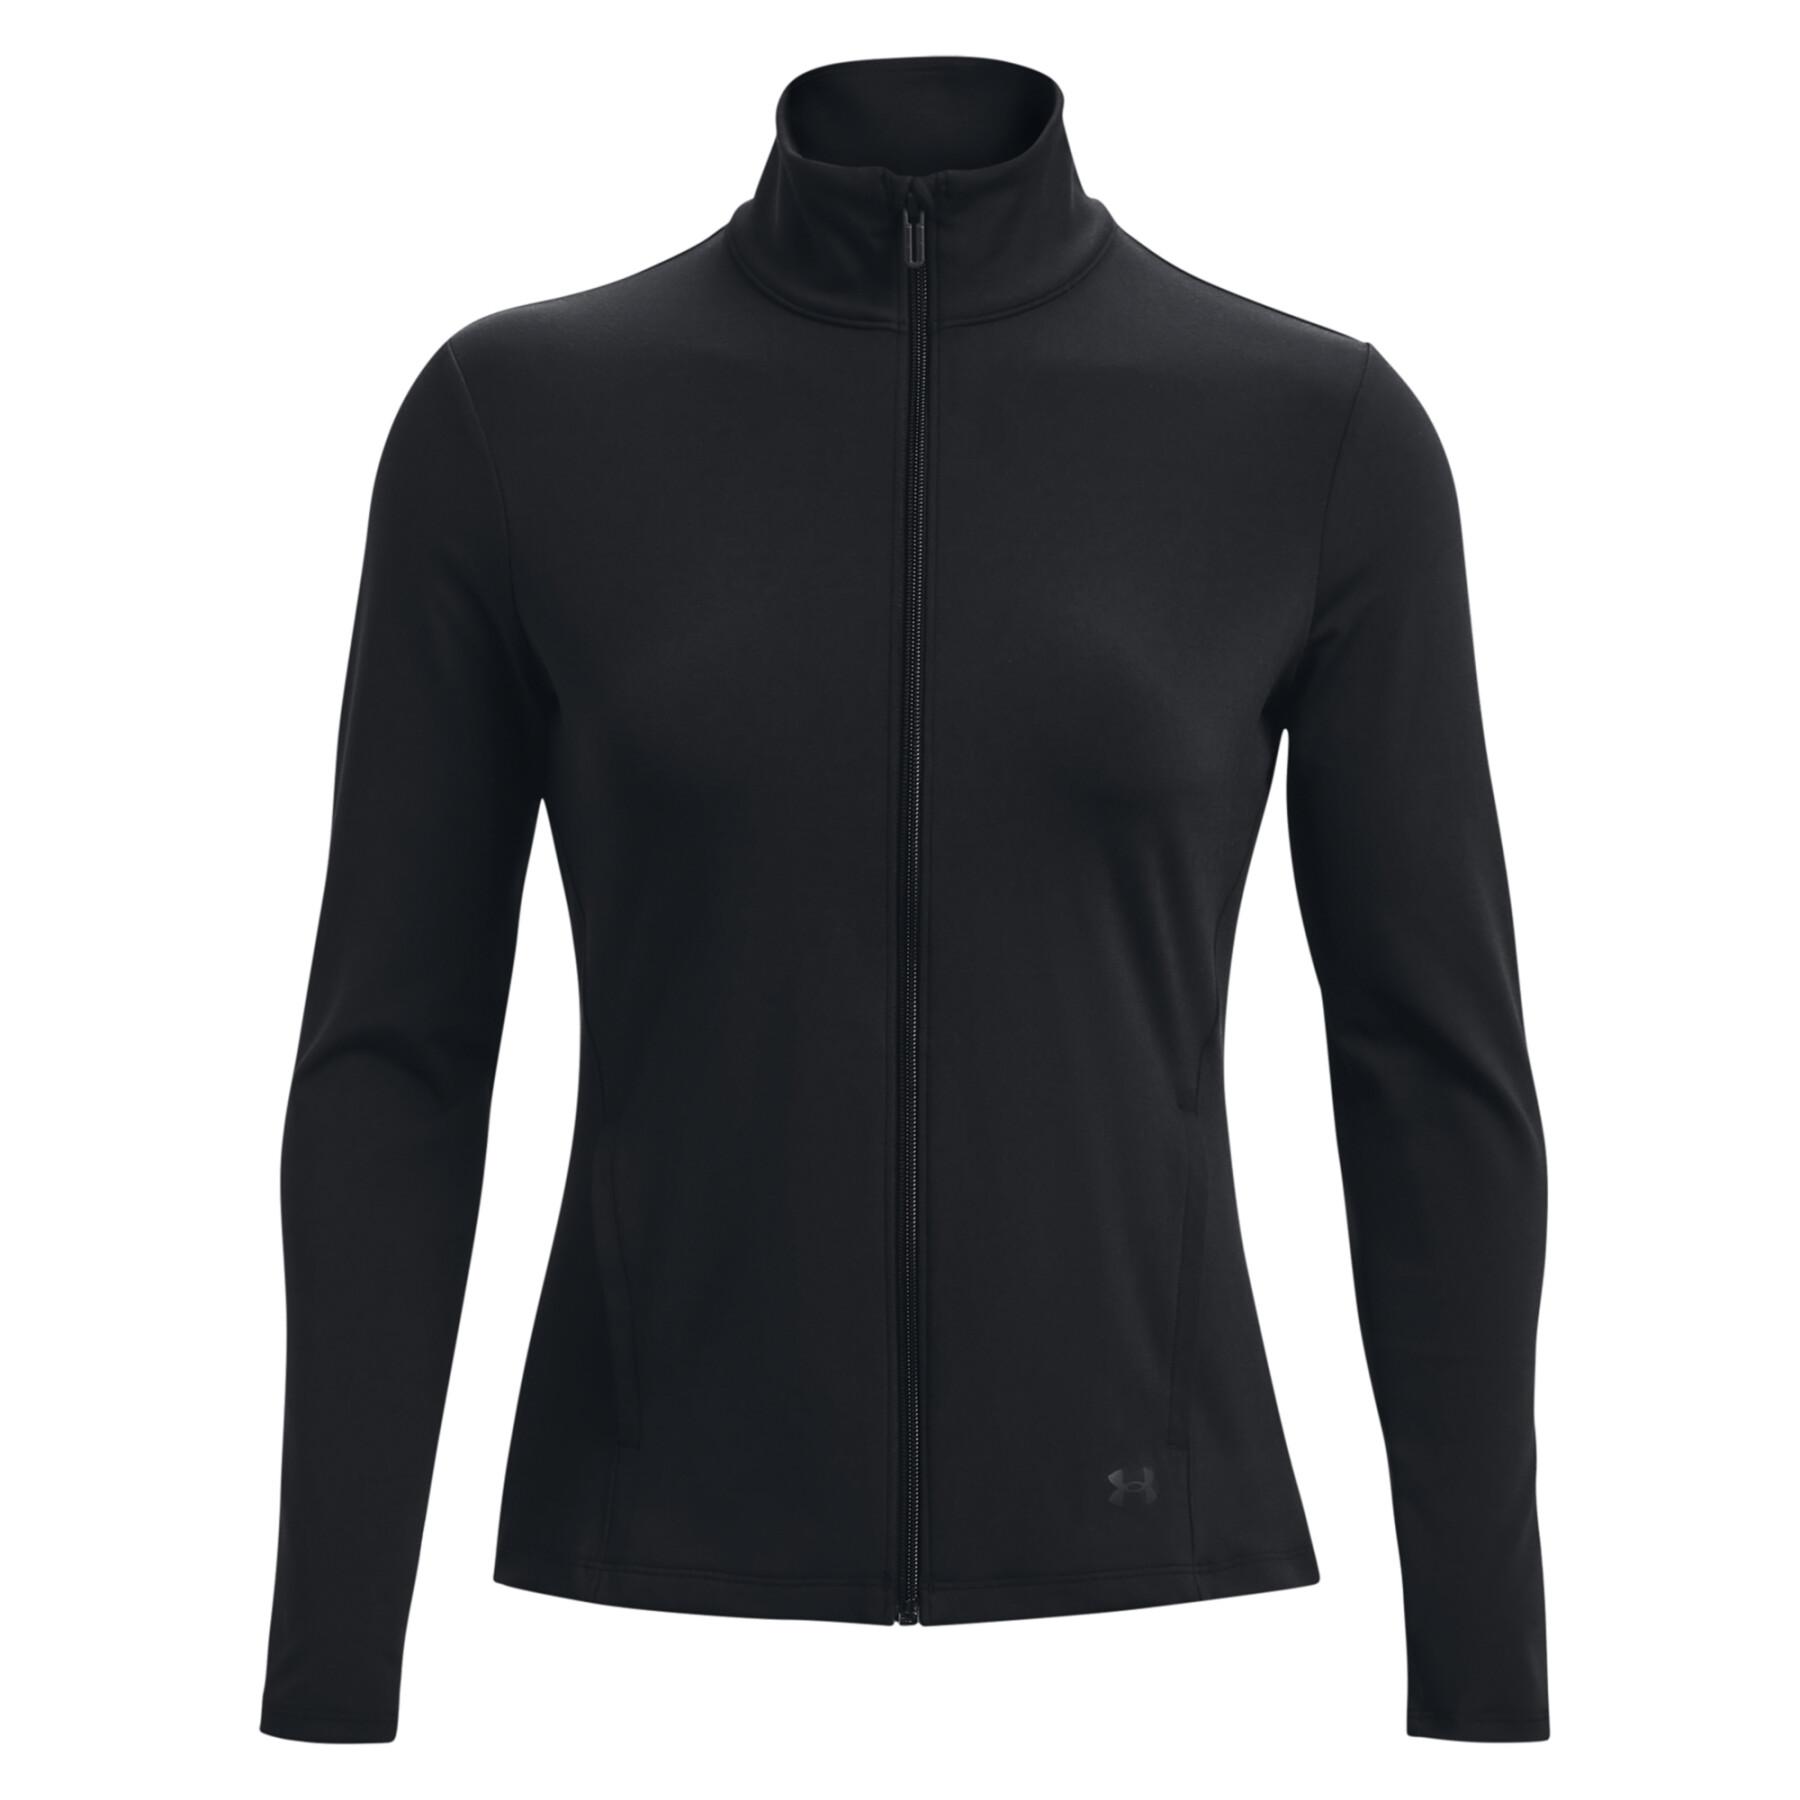 Women's jacket Under Armour Motion